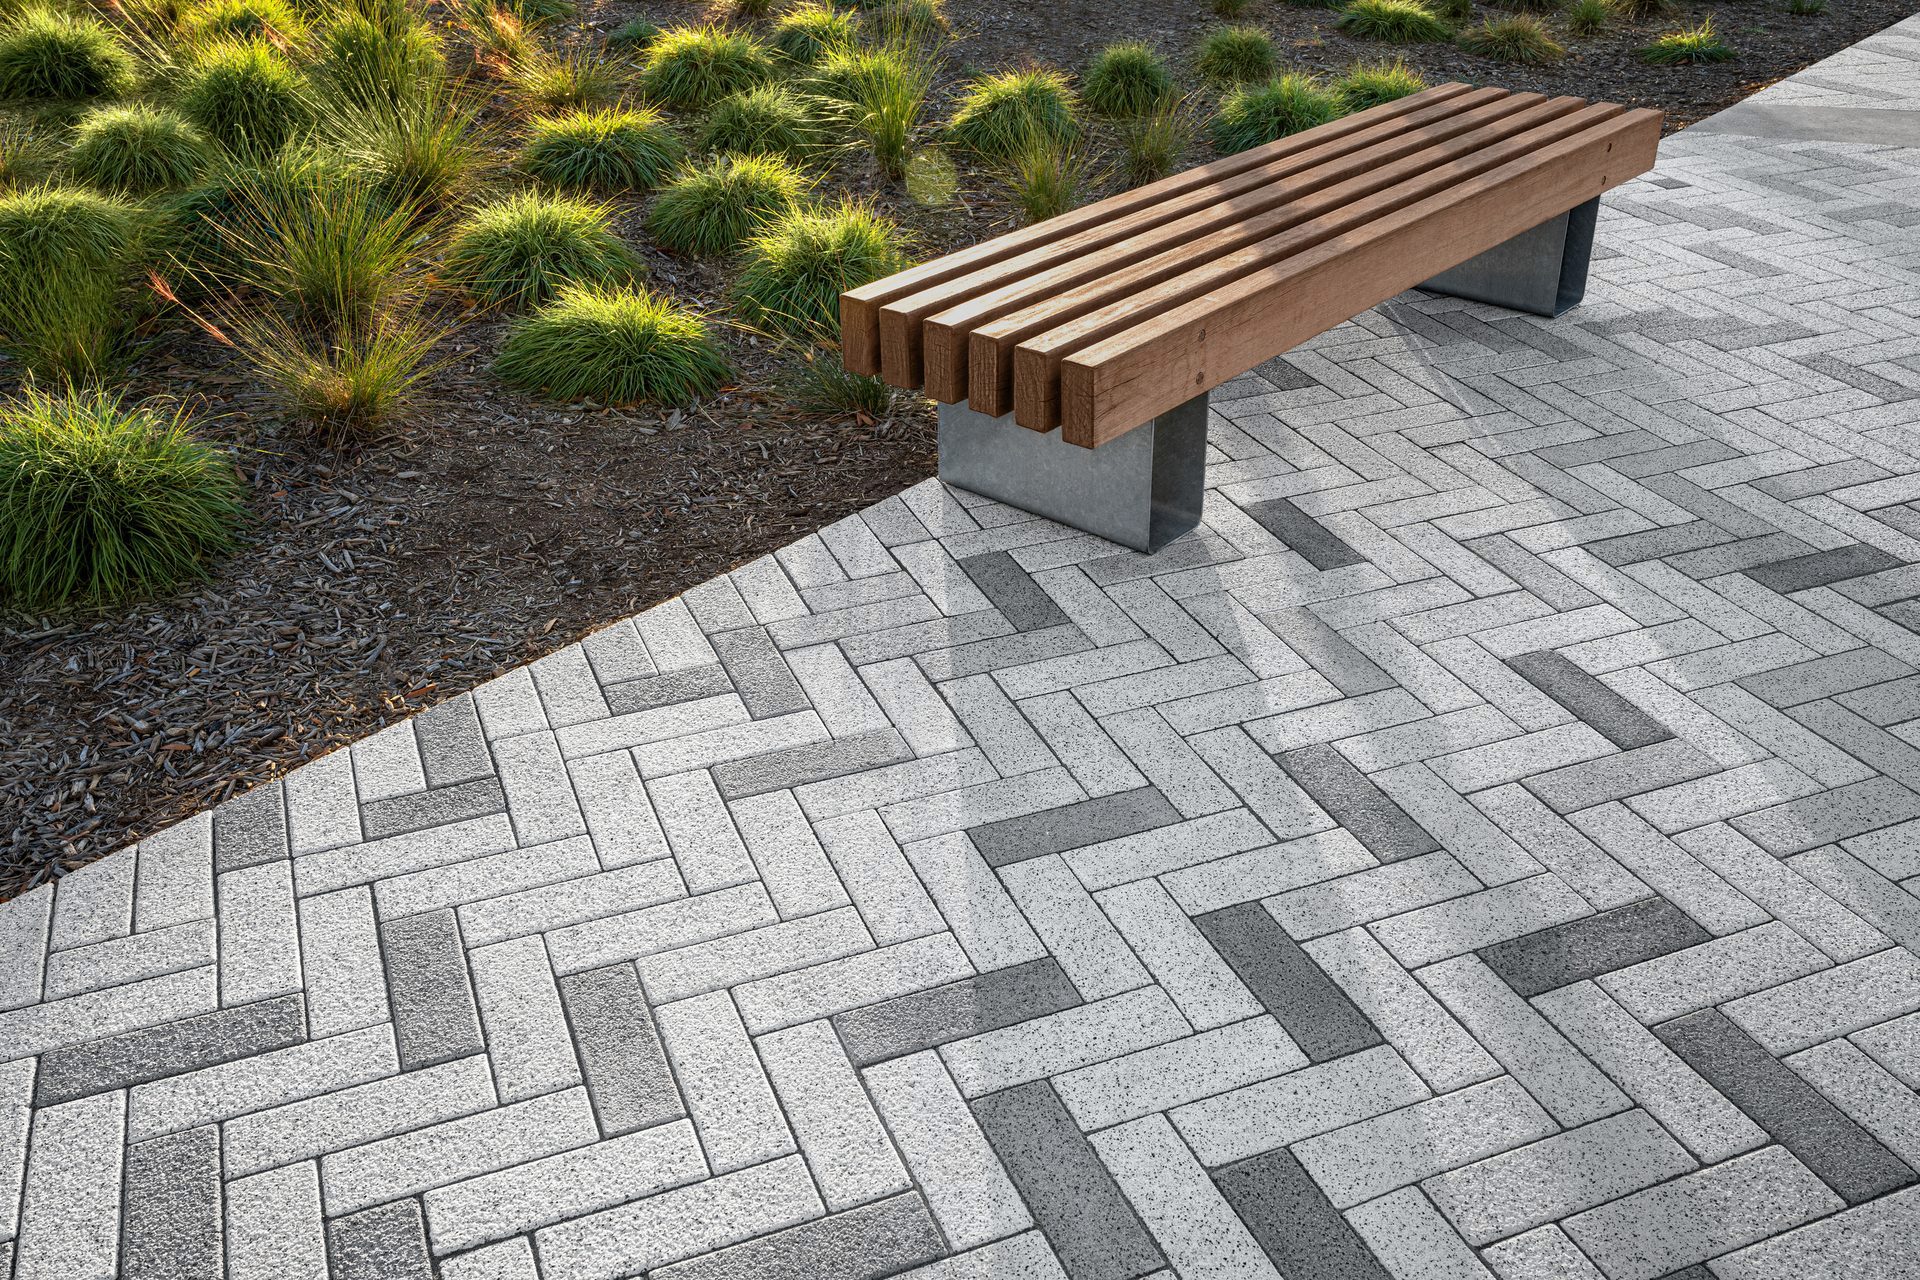 Detailed view of the mosaic pattern created using Techo-Bloc Industria Granitex Paver at Unity Park in Greenville, South Carolina.